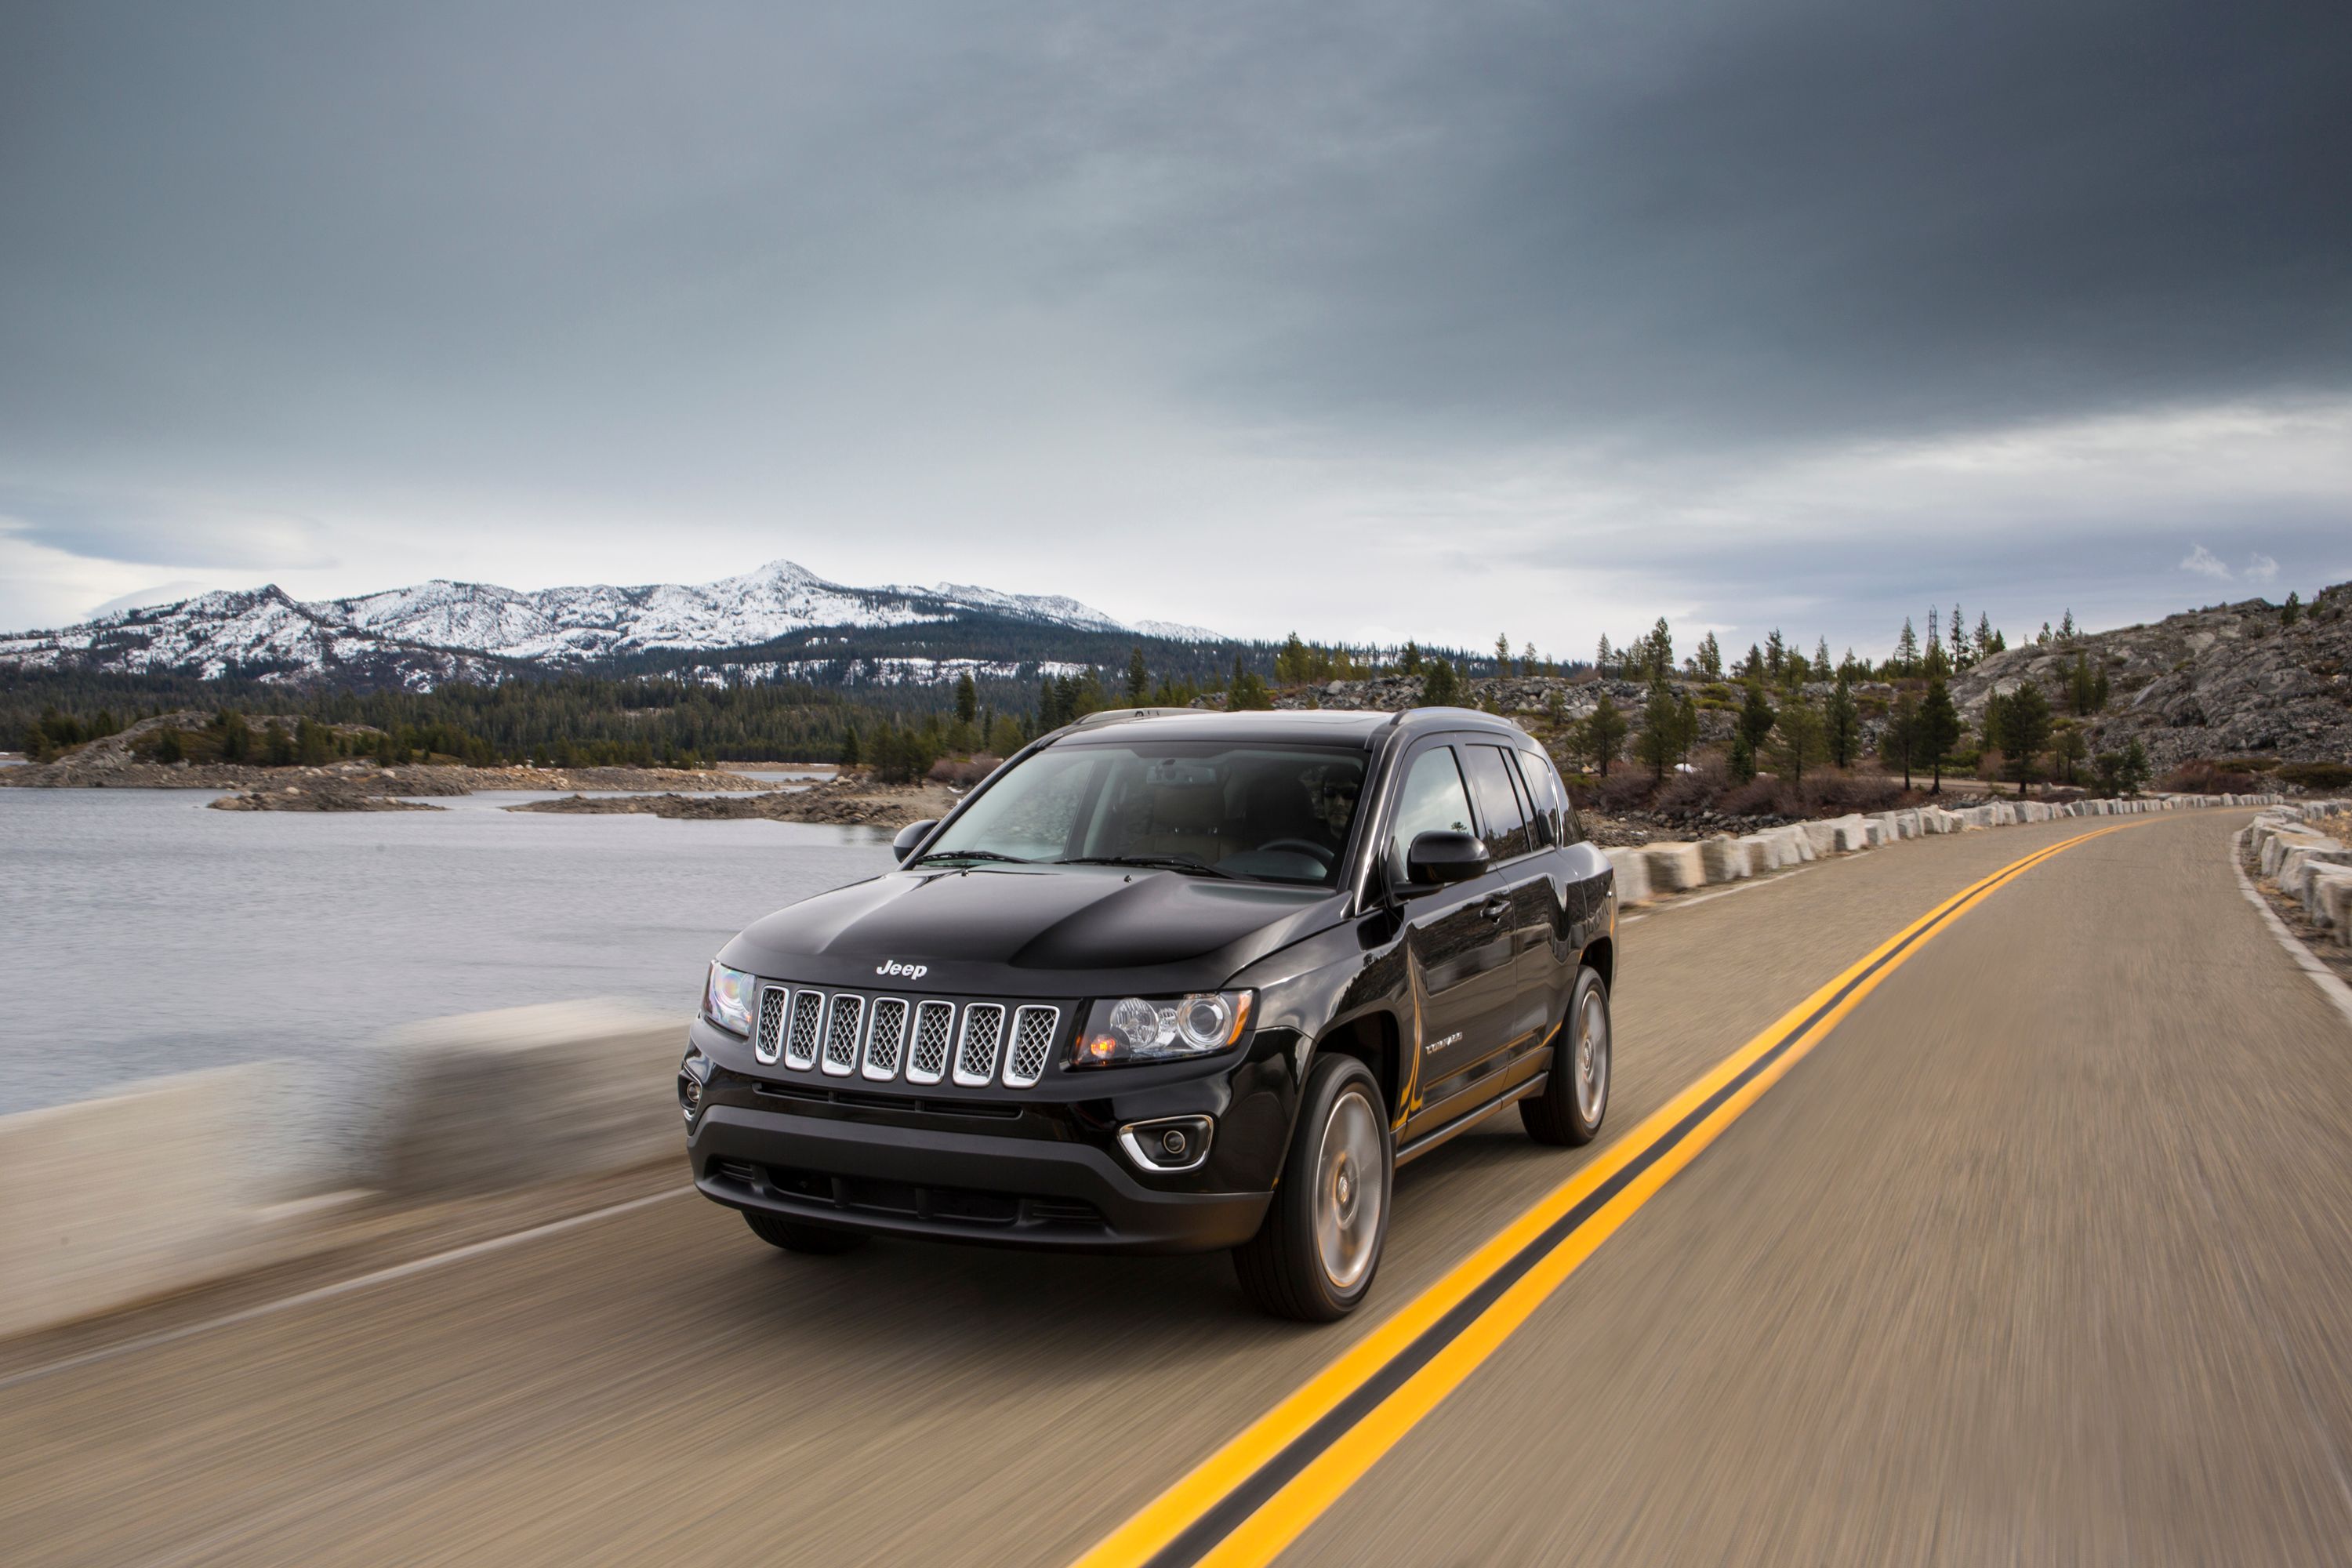 2018 Wallpaper of the Day: 2014 Jeep Compass